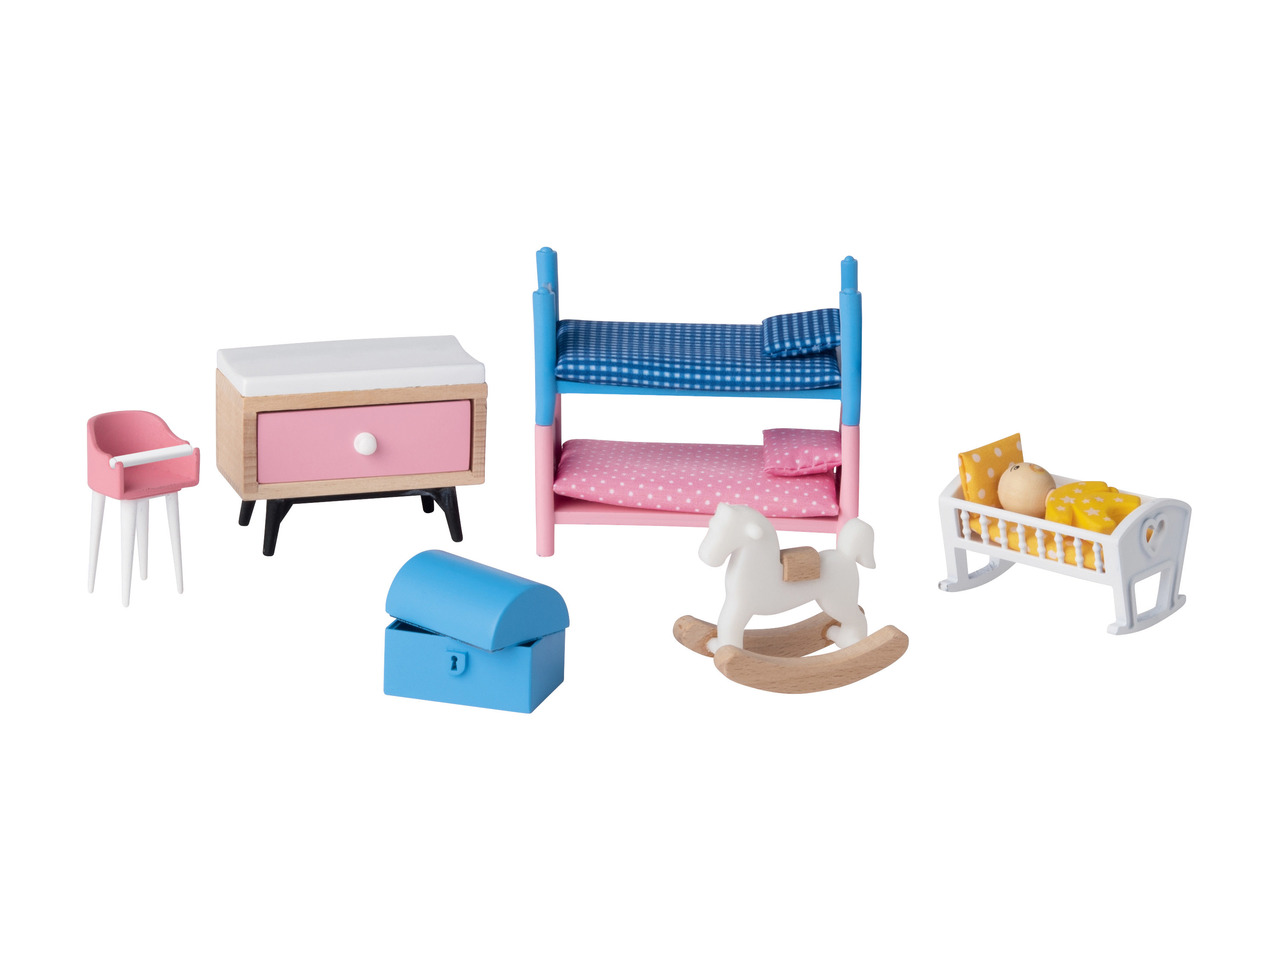 PLAYTIVE JUNIOR Doll's House Accessories